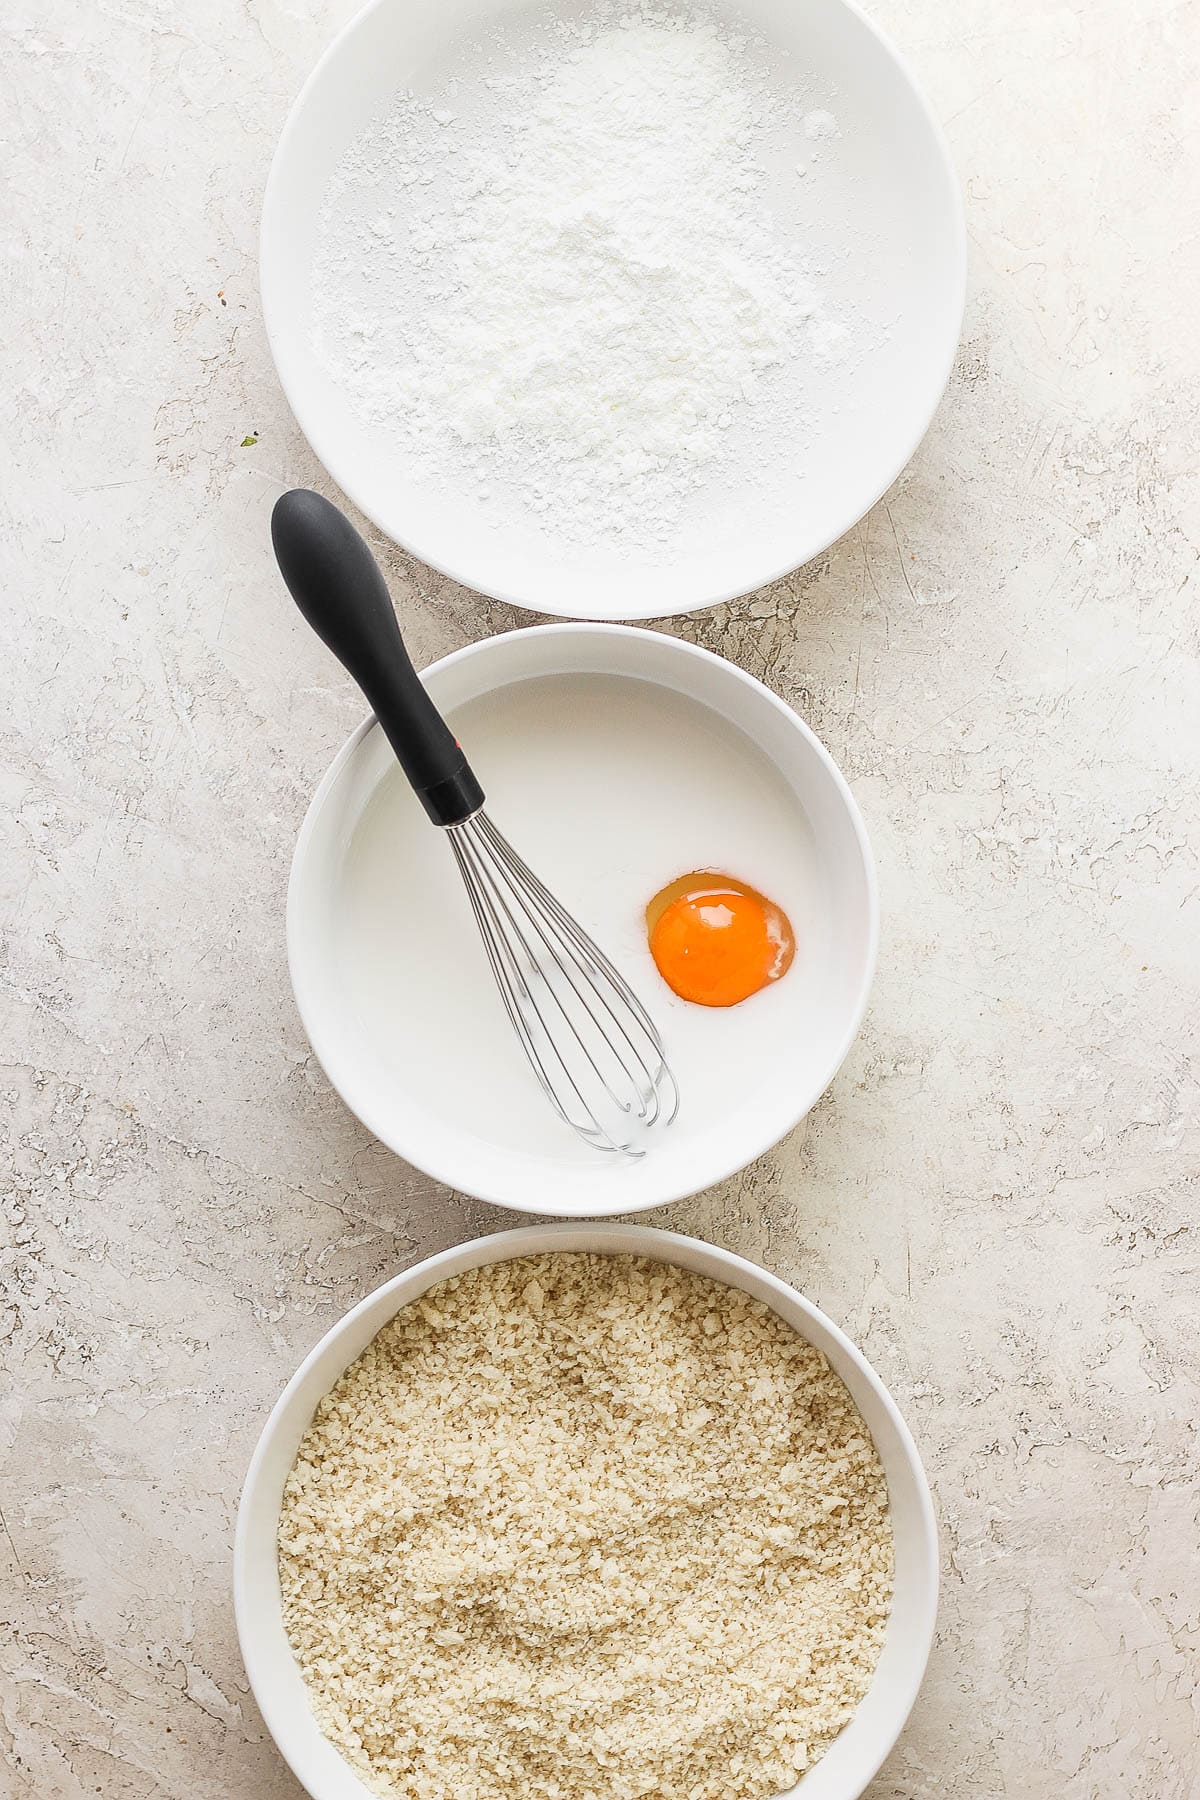 A bowl with corn starch next to a bowl with almond milk and an egg, next to a bowl with panko bread crumbs.